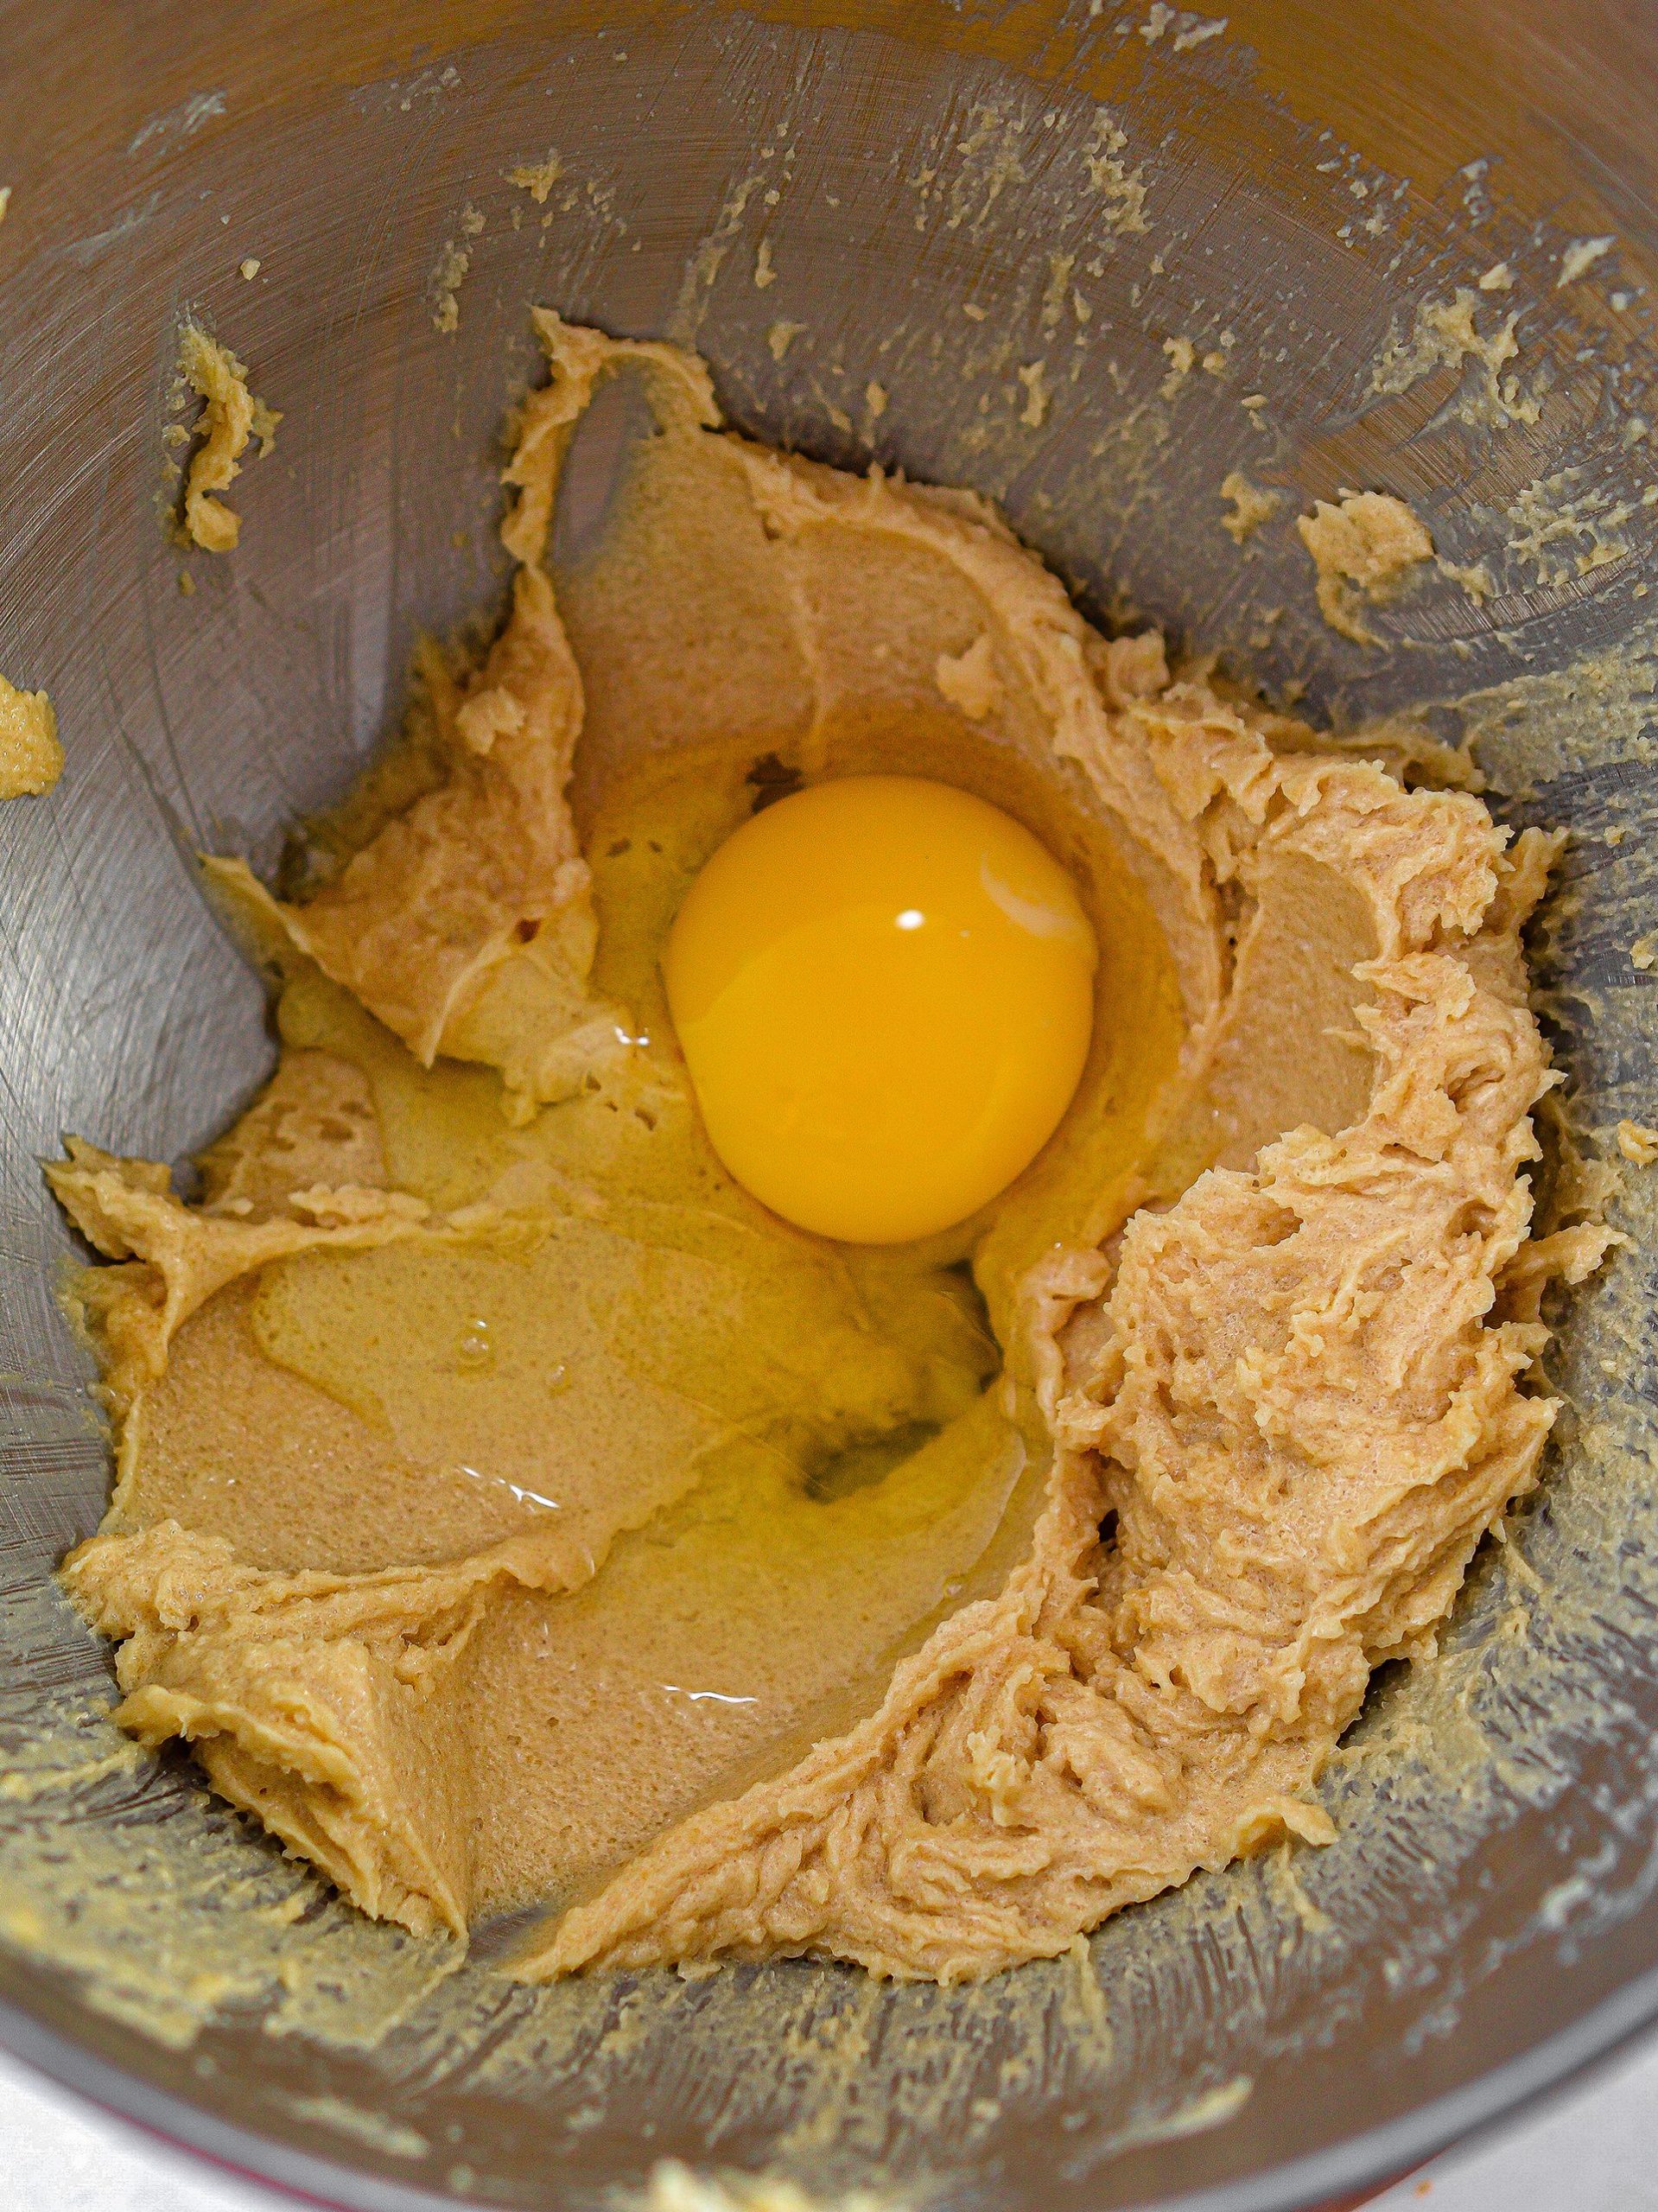 Mix in the peanut butter, egg, salt, baking soda and flour until a smooth batter forms.